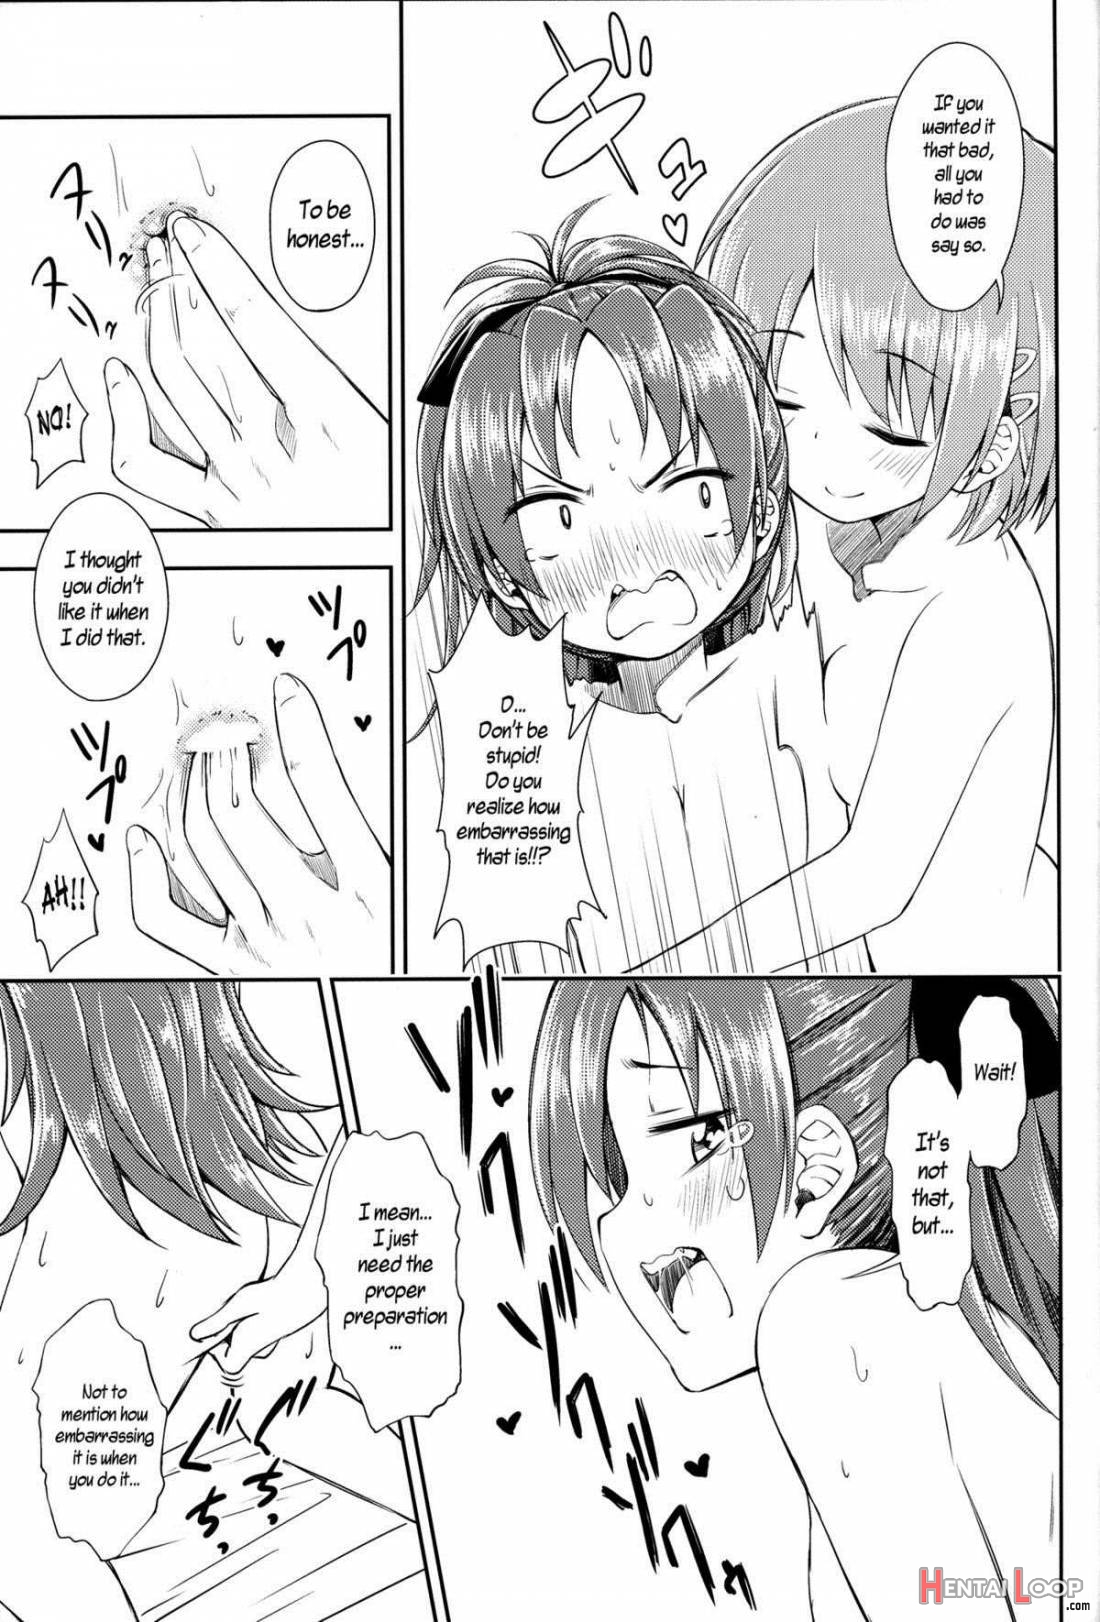 Lovely Girls’ Lily vol.8 page 6